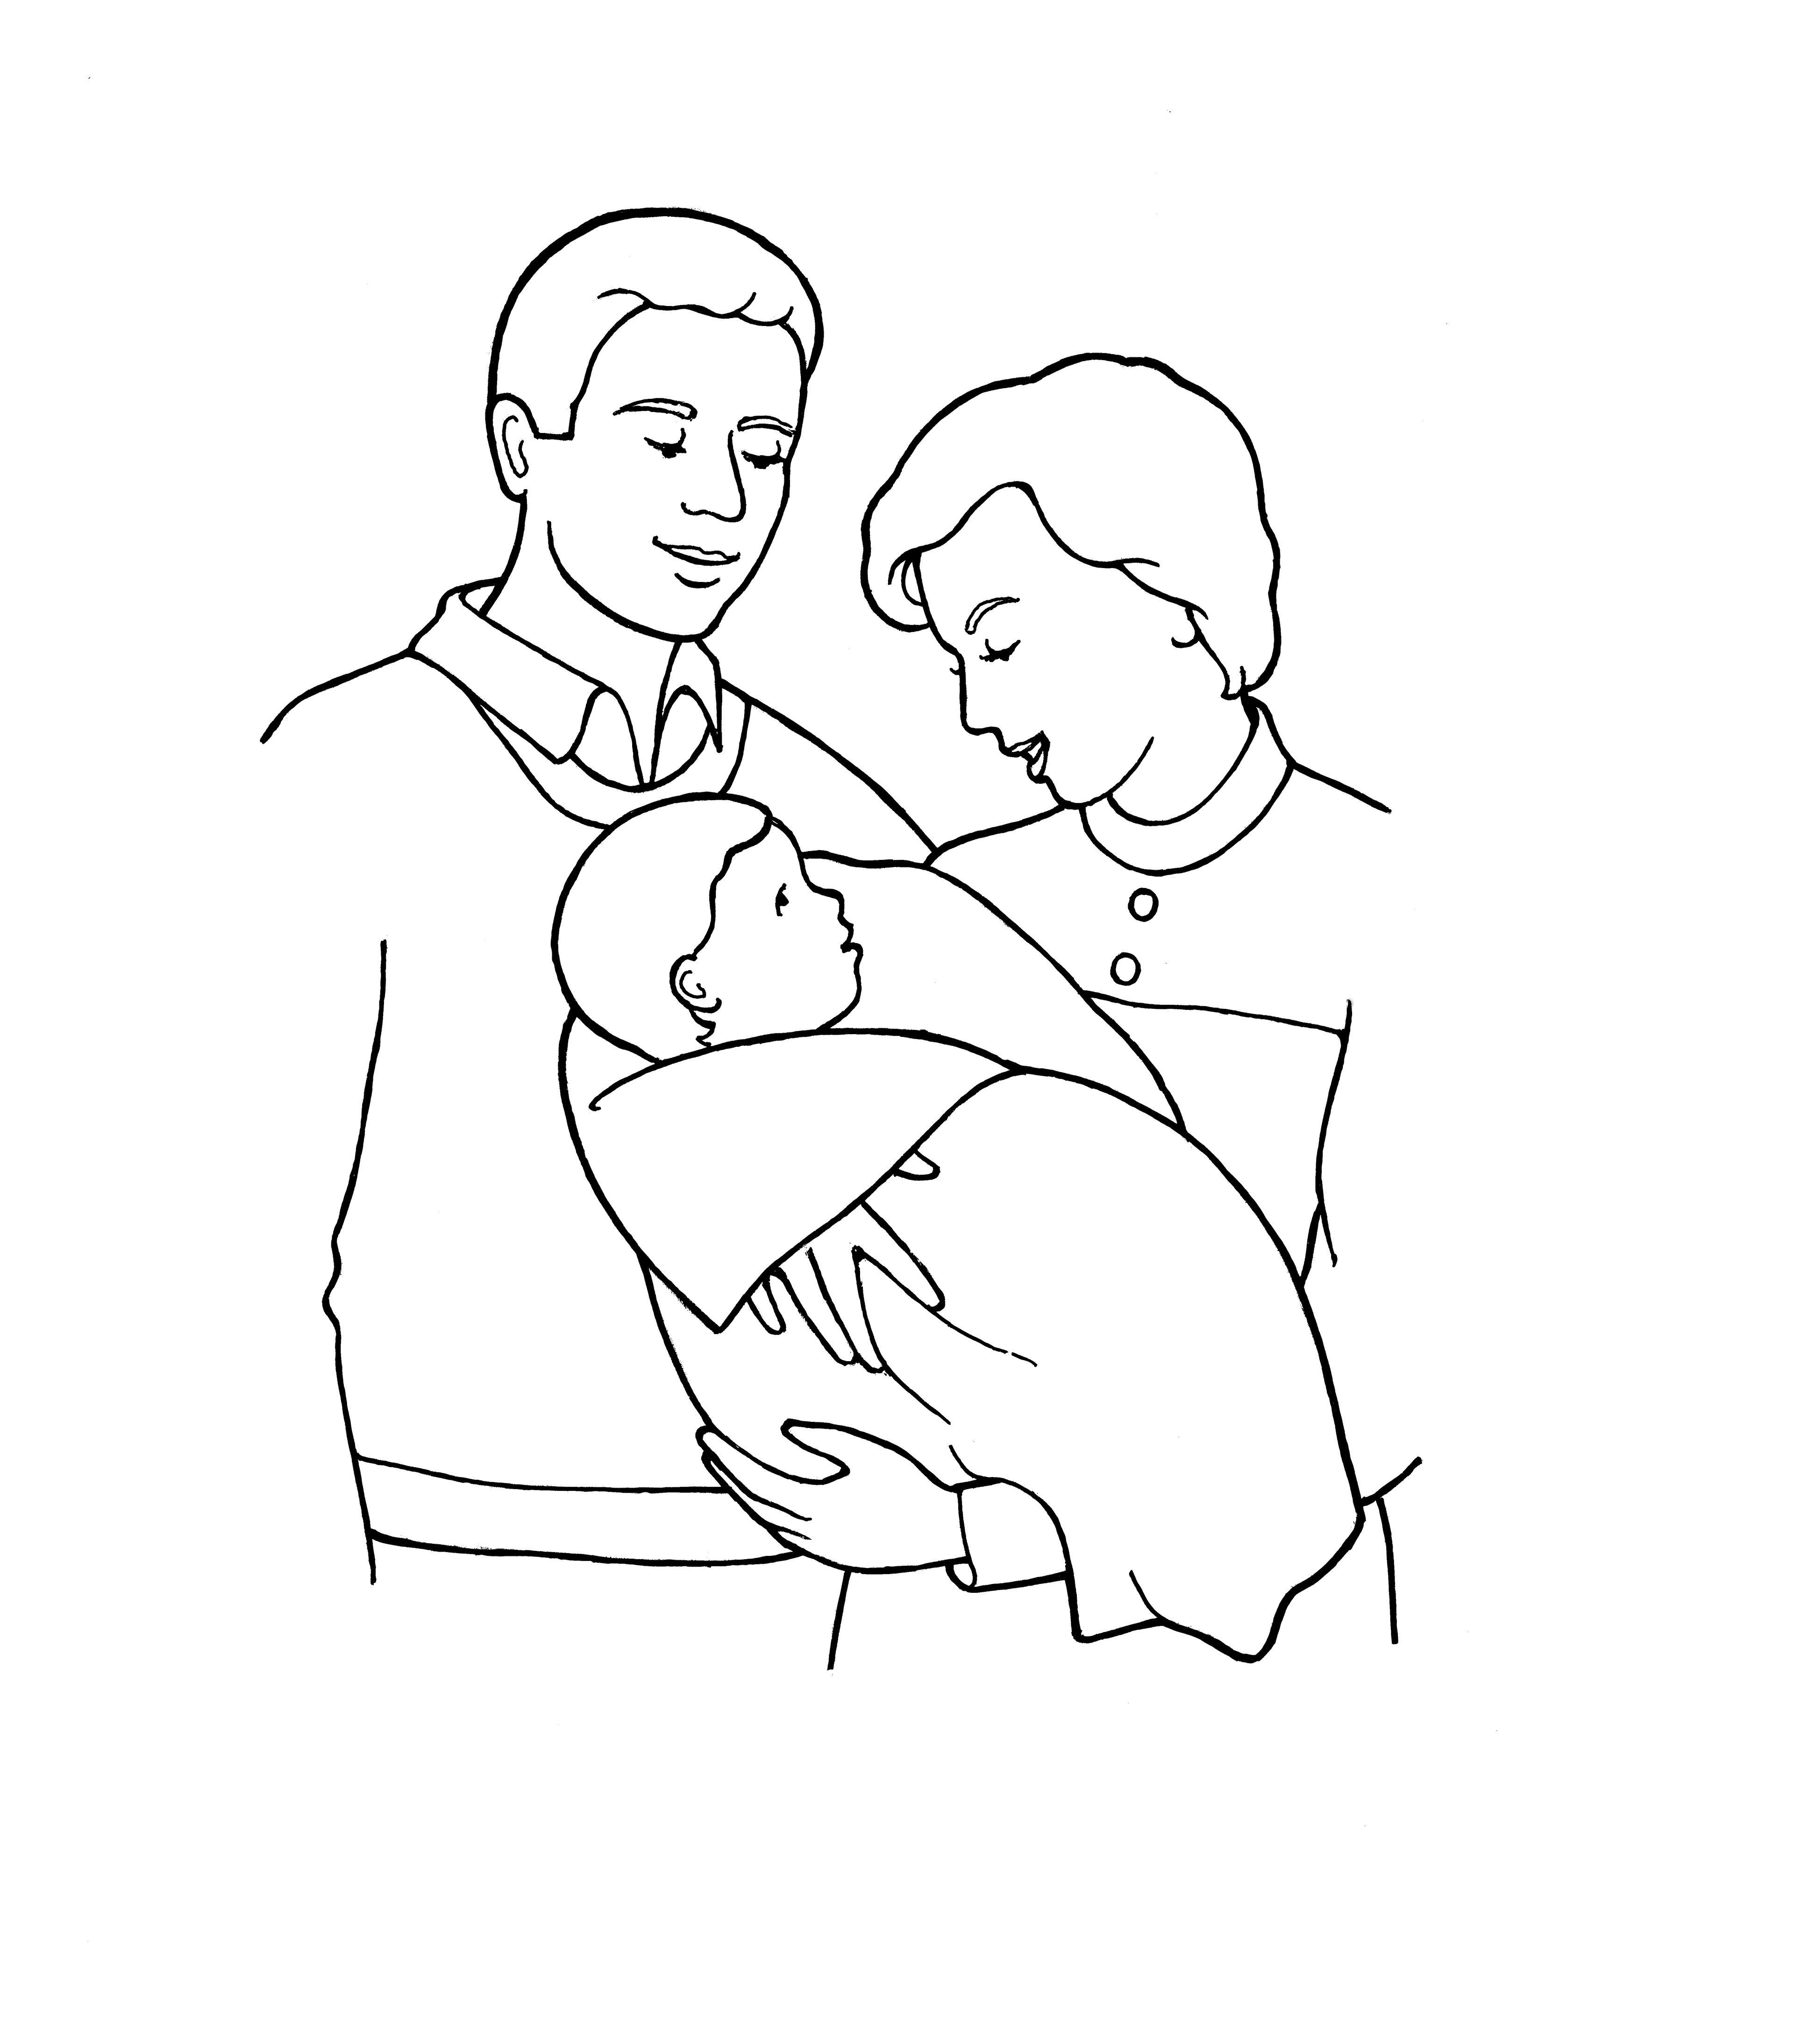 An illustration of parents holding a small baby, from the nursery manual Behold Your Little Ones (2008), page 15.